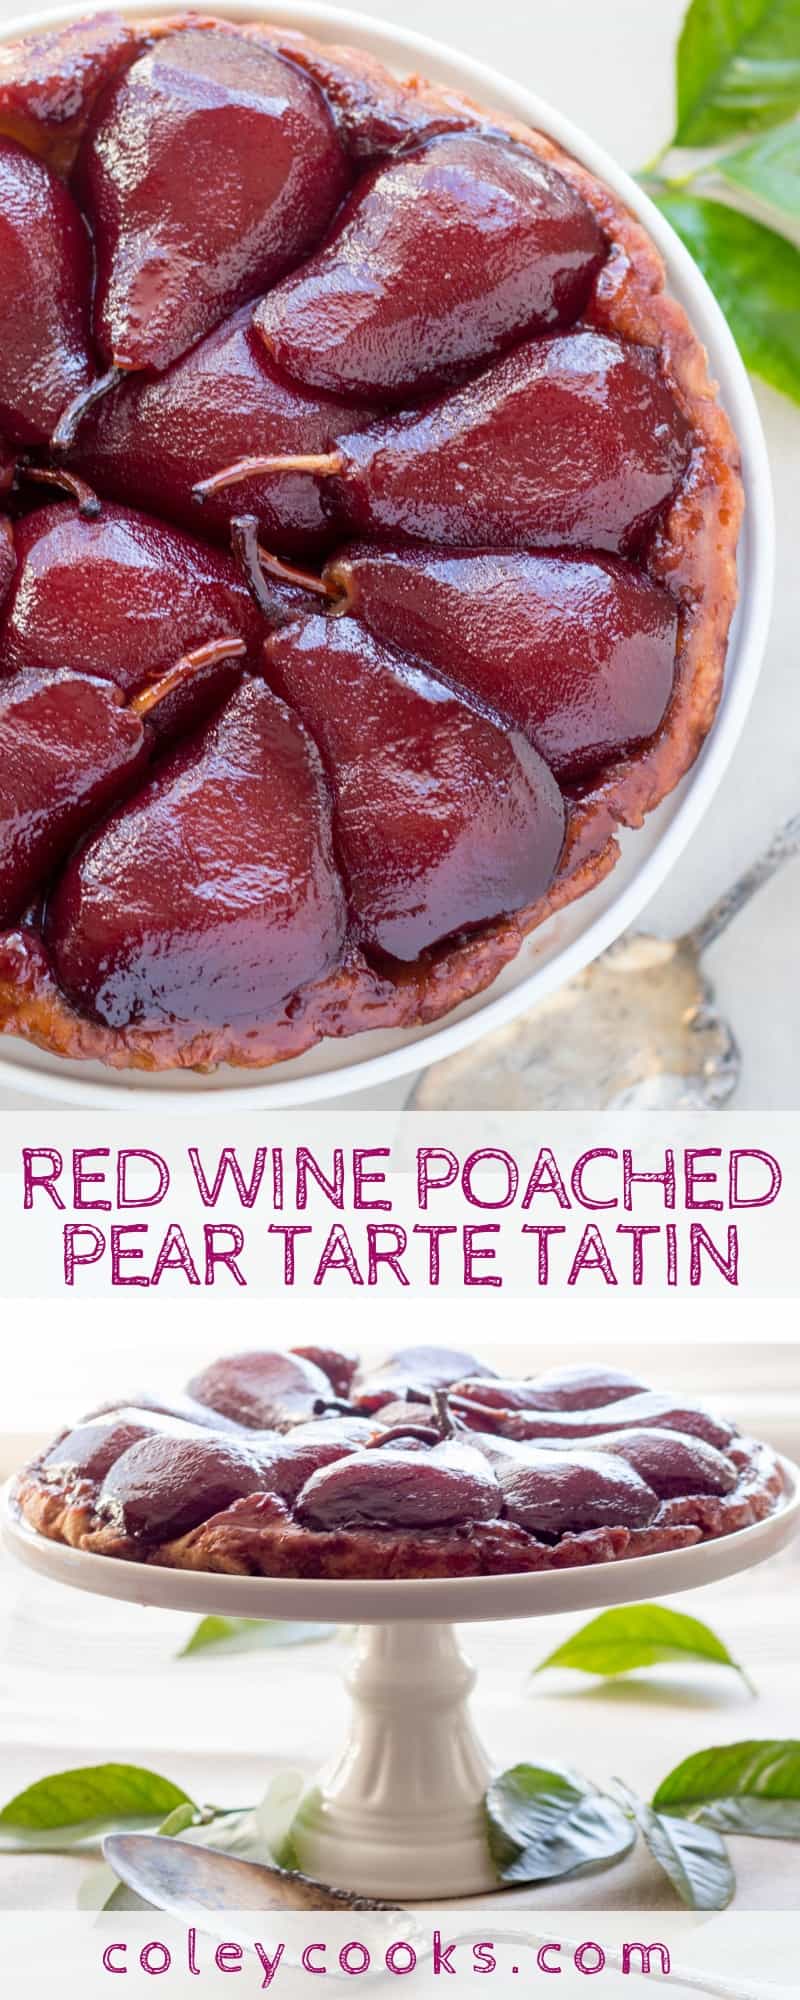 RED WINE POACHED PEAR TARTE TATIN | This gorgeous show-stopping poached pear dessert will wow everyone at the party. #dessert #French #pears #poachedpears #tartetatin #Christmas #Thanksgiving #pie #tart #wine | ColeyCooks.com